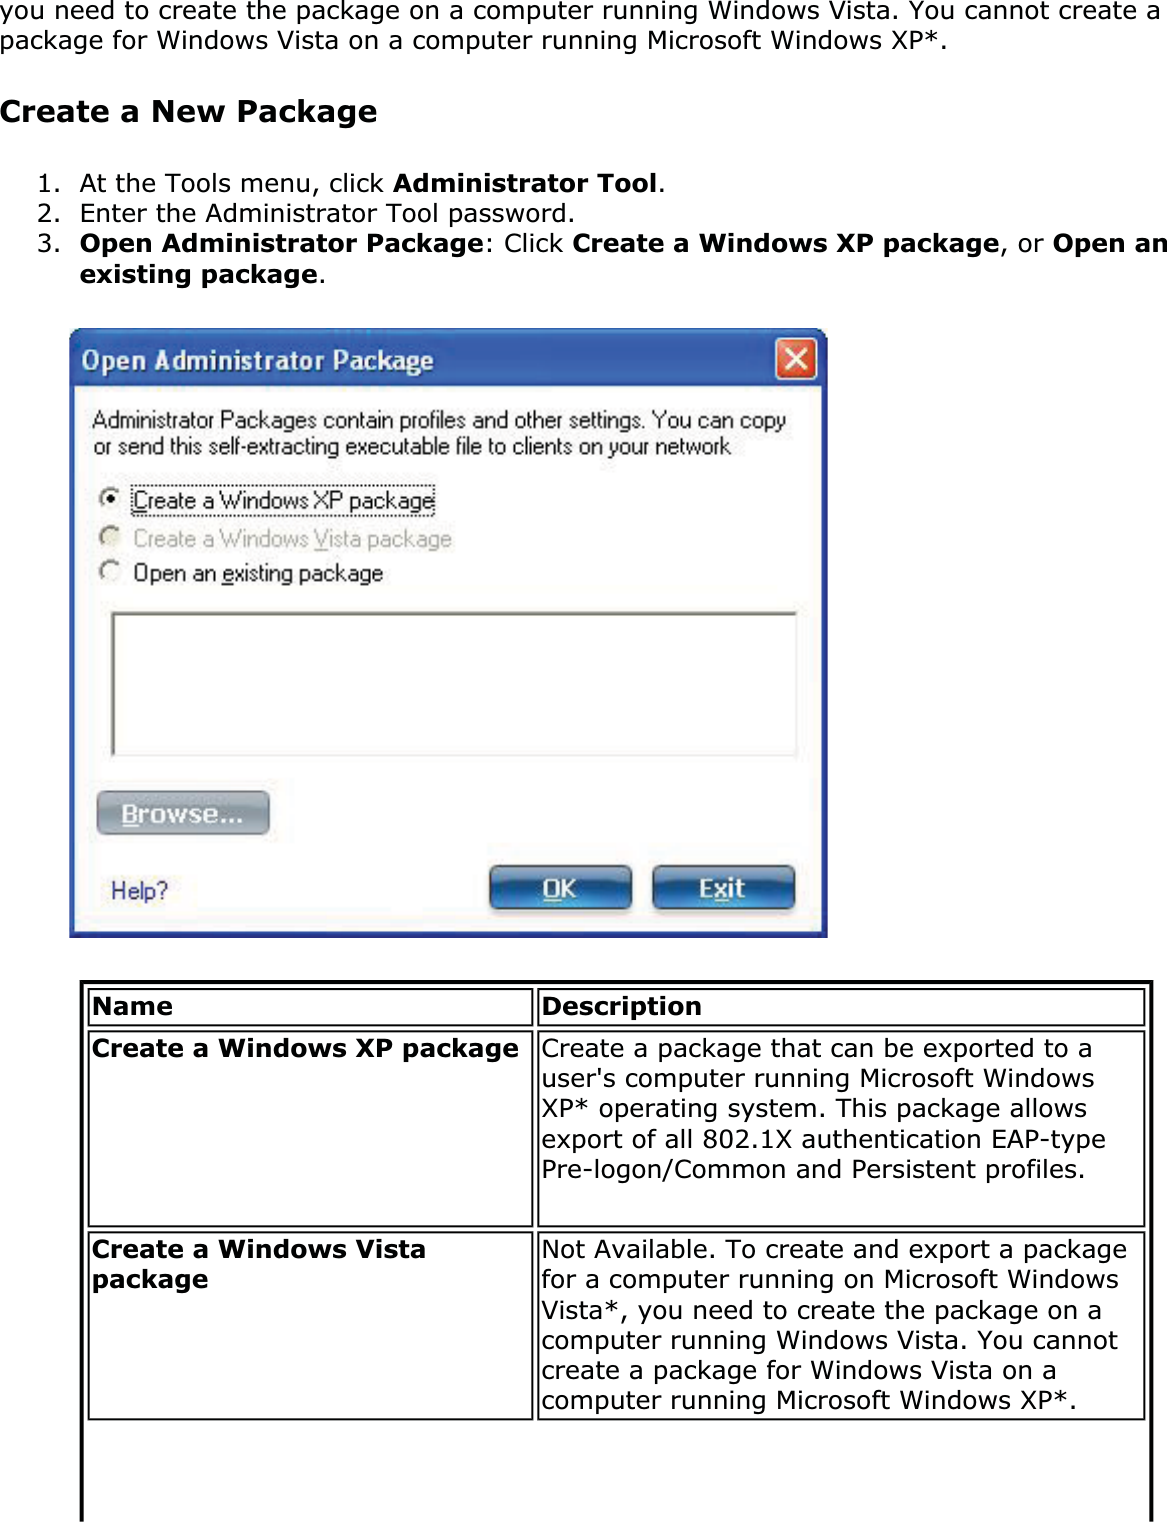 you need to create the package on a computer running Windows Vista. You cannot create a package for Windows Vista on a computer running Microsoft Windows XP*.Create a New Package1. At the Tools menu, click Administrator Tool.2. Enter the Administrator Tool password.3. Open Administrator Package: Click Create a Windows XP package, or Open an existing package.Name DescriptionCreate a Windows XP package  Create a package that can be exported to a user&apos;s computer running Microsoft Windows XP* operating system. This package allows export of all 802.1X authentication EAP-type Pre-logon/Common and Persistent profiles.Create a Windows Vista packageNot Available. To create and export a package for a computer running on Microsoft Windows Vista*, you need to create the package on a computer running Windows Vista. You cannot create a package for Windows Vista on a computer running Microsoft Windows XP*.